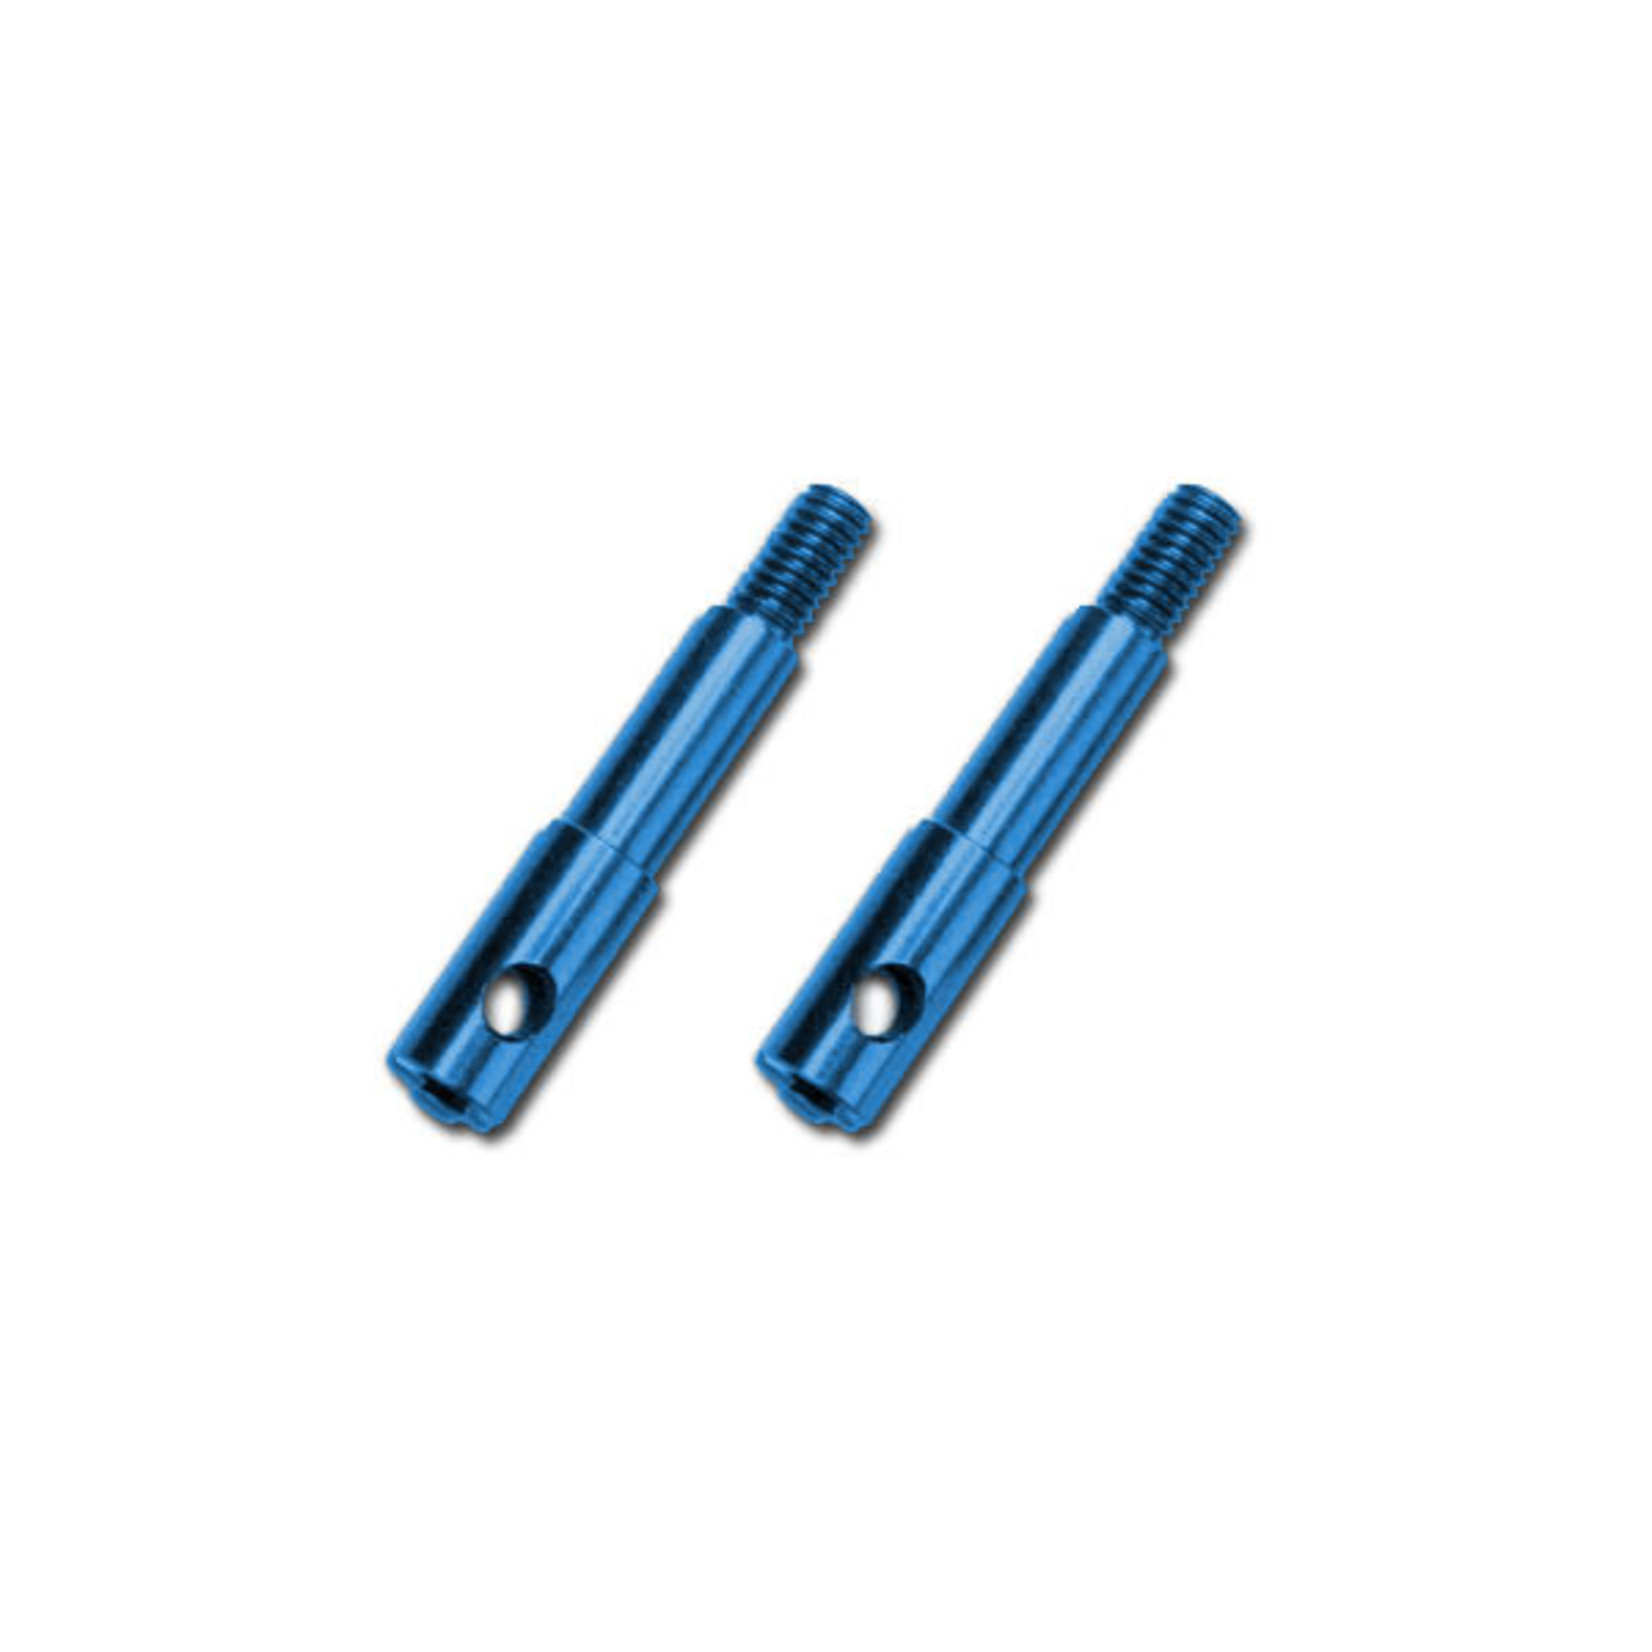 Traxxas 5537X - Wheel spindles, front, 7075-T6 aluminum, b